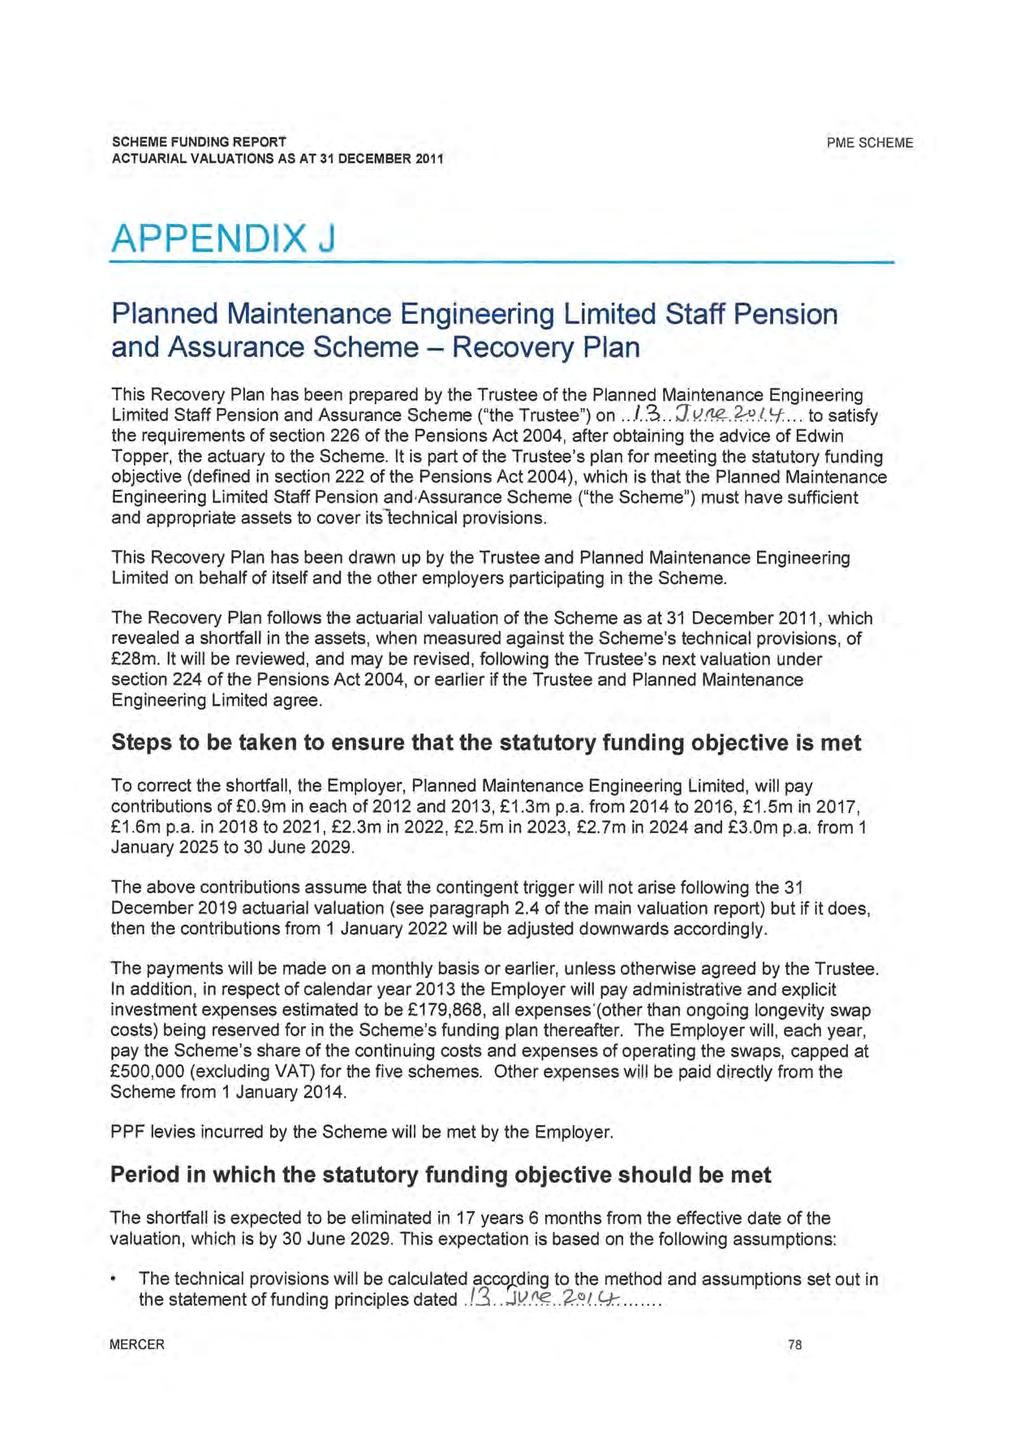 PME SCHEME APPENDIX J Planned Maintenance Engineering Limited Staff Pension and Assurance Scheme - Recovery Plan This Recovery Plan has been prepared by the Trustee of the Planned Maintenance